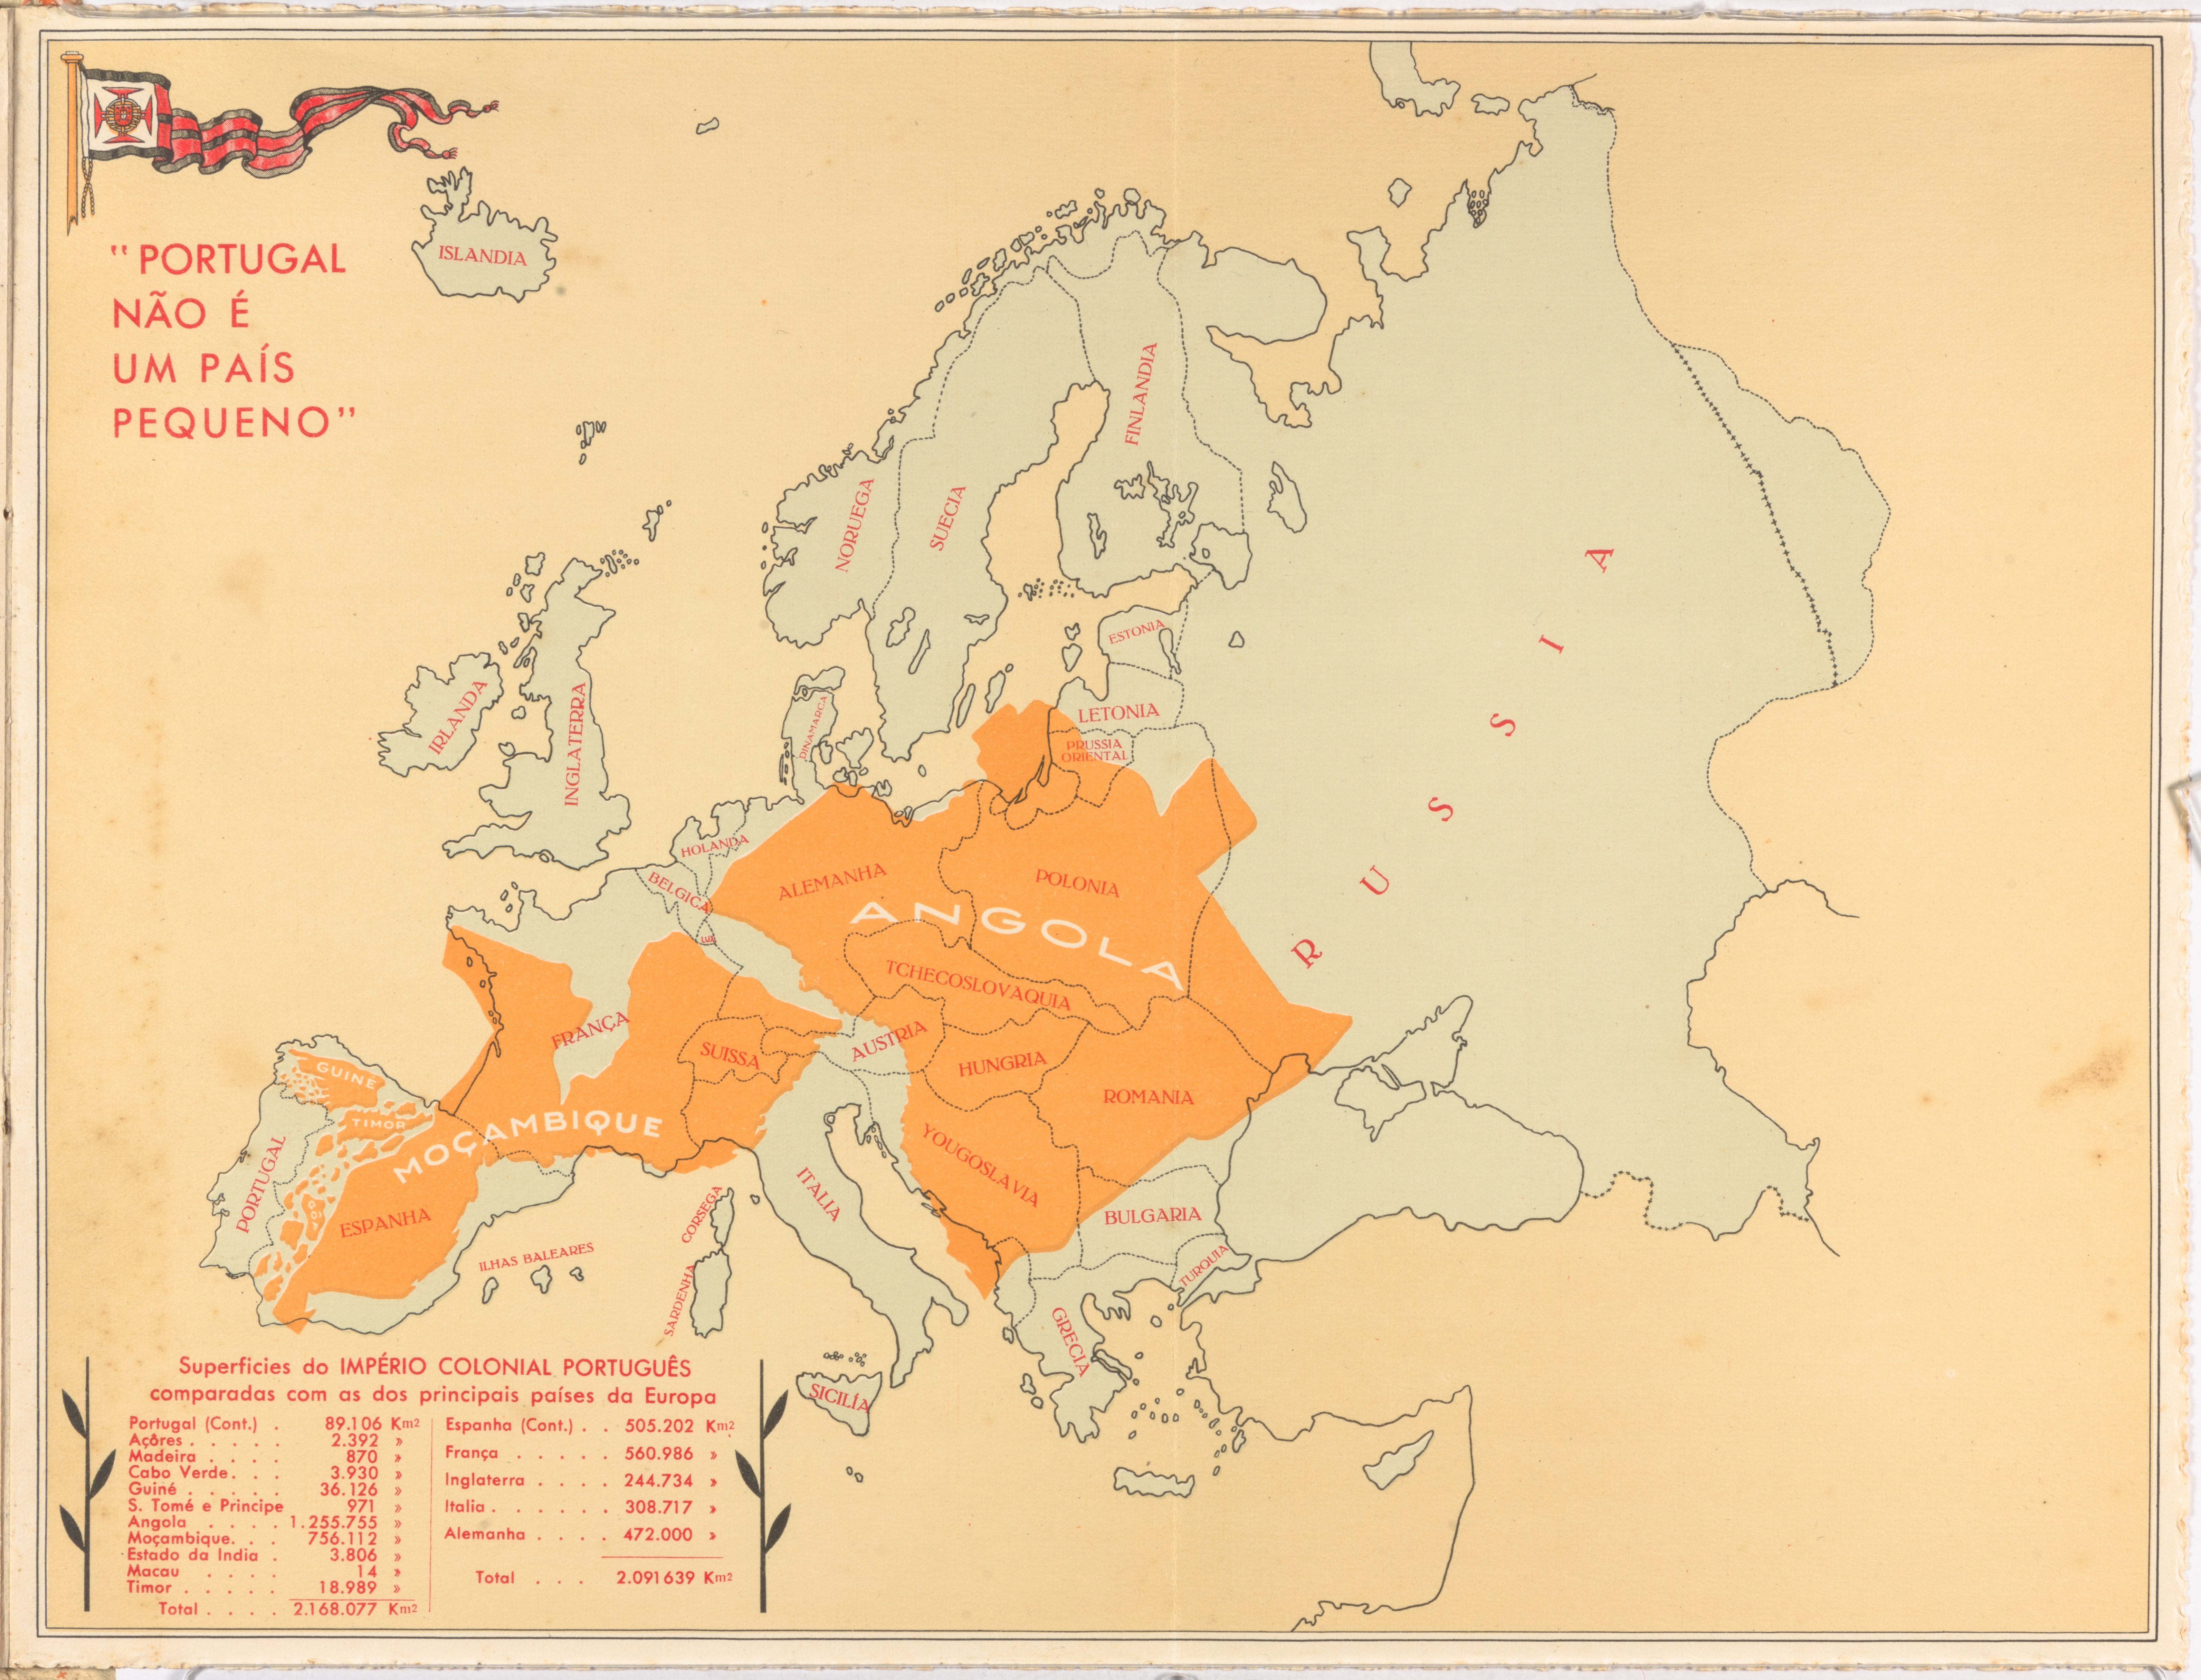 A 1934 map of Europe with Portugal's colonies overlaid.